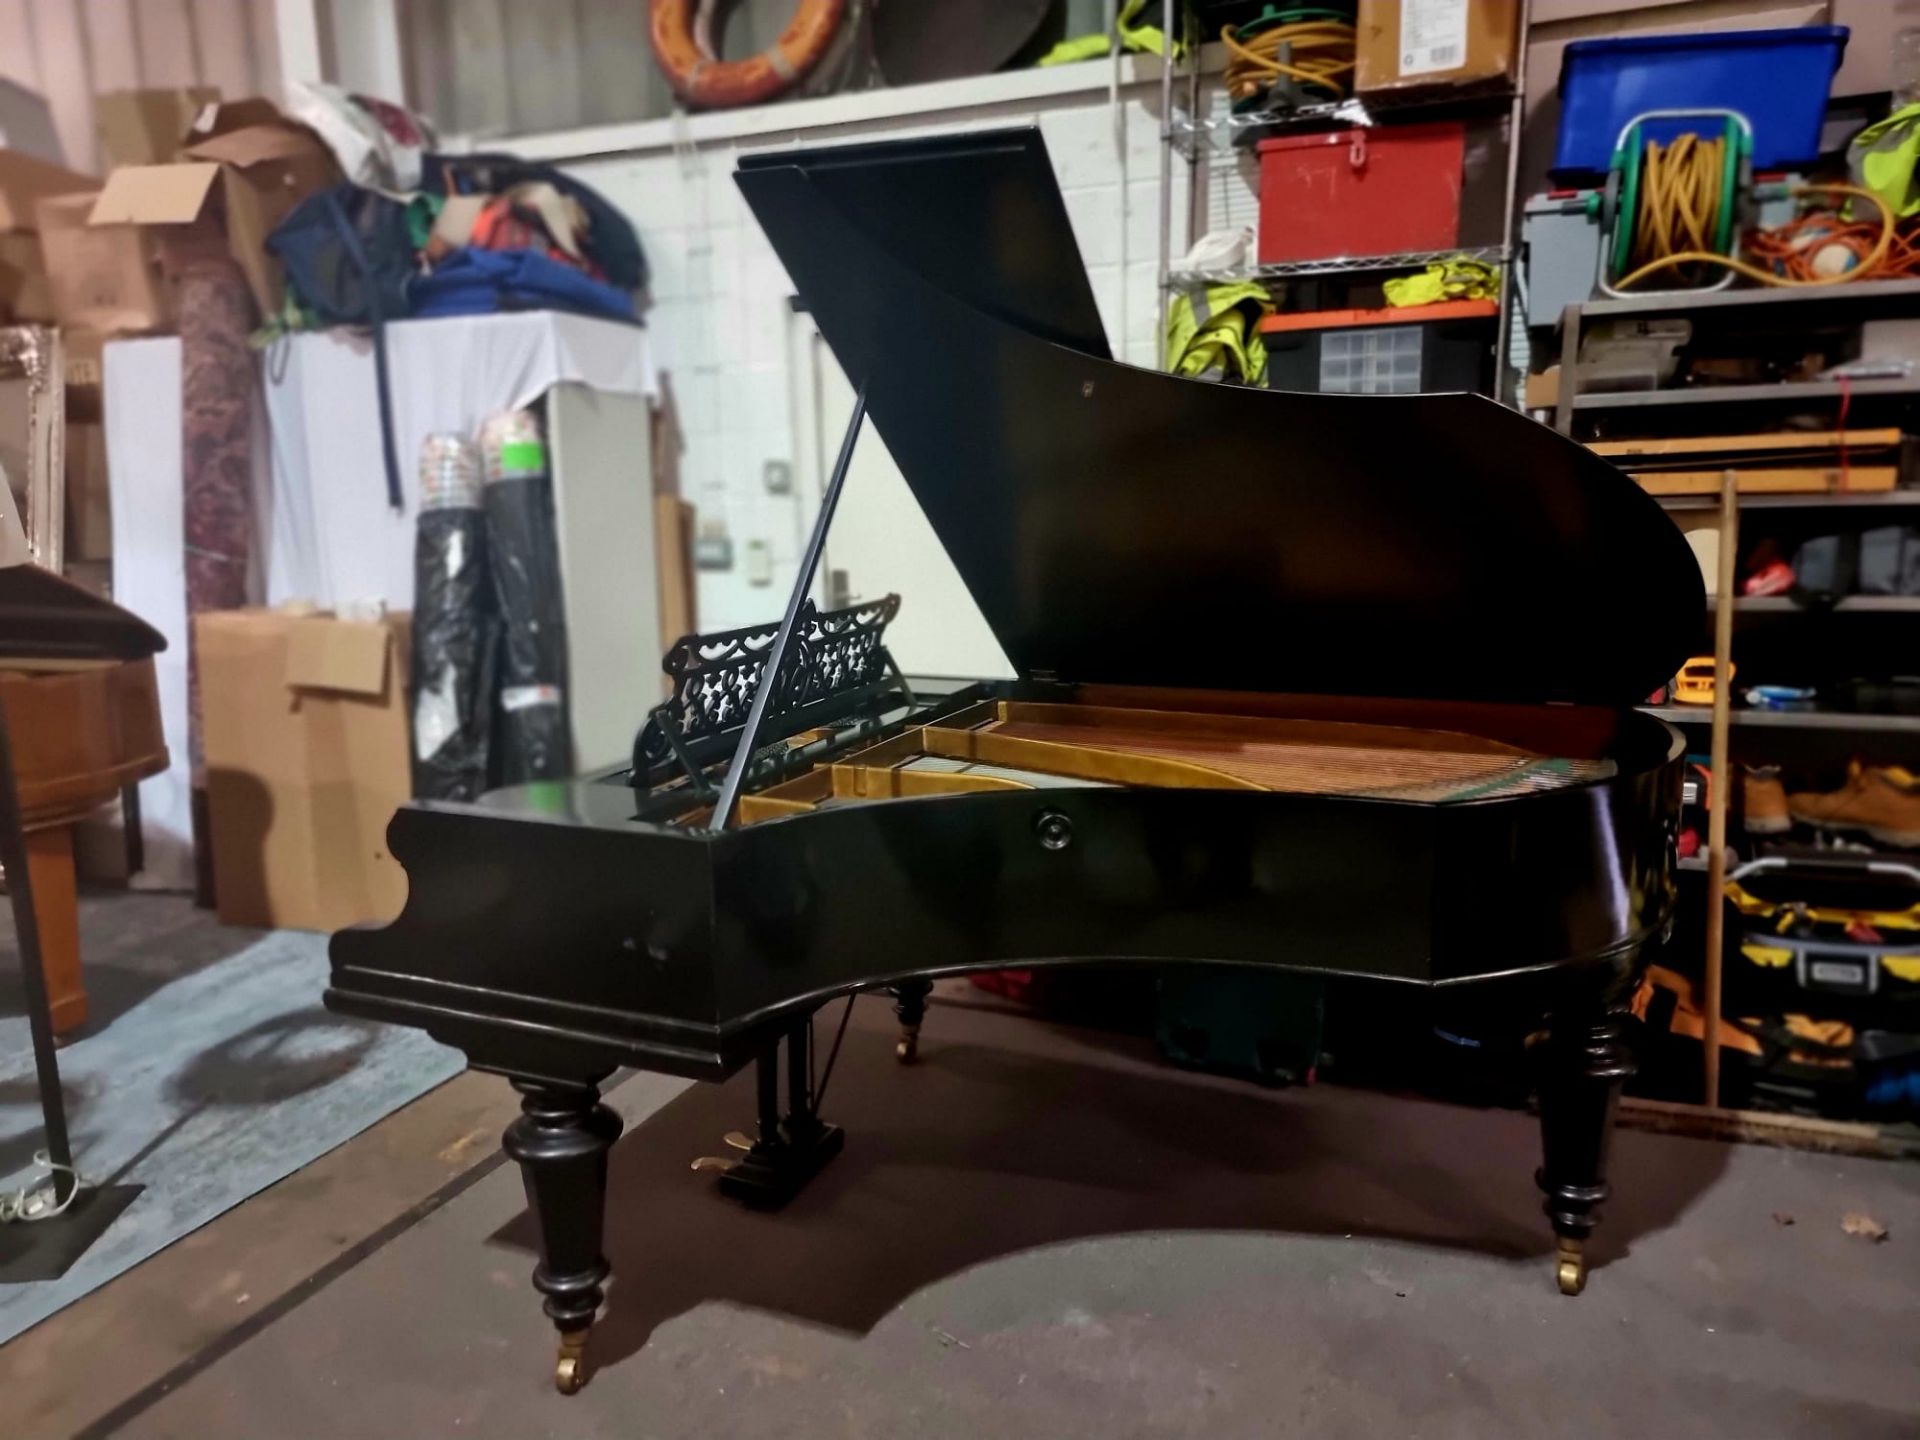 Bechstein Model V Boudoir Grand Piano In Polished Ebony Bechstein Are Widely Regarded As One Of - Bild 5 aus 8